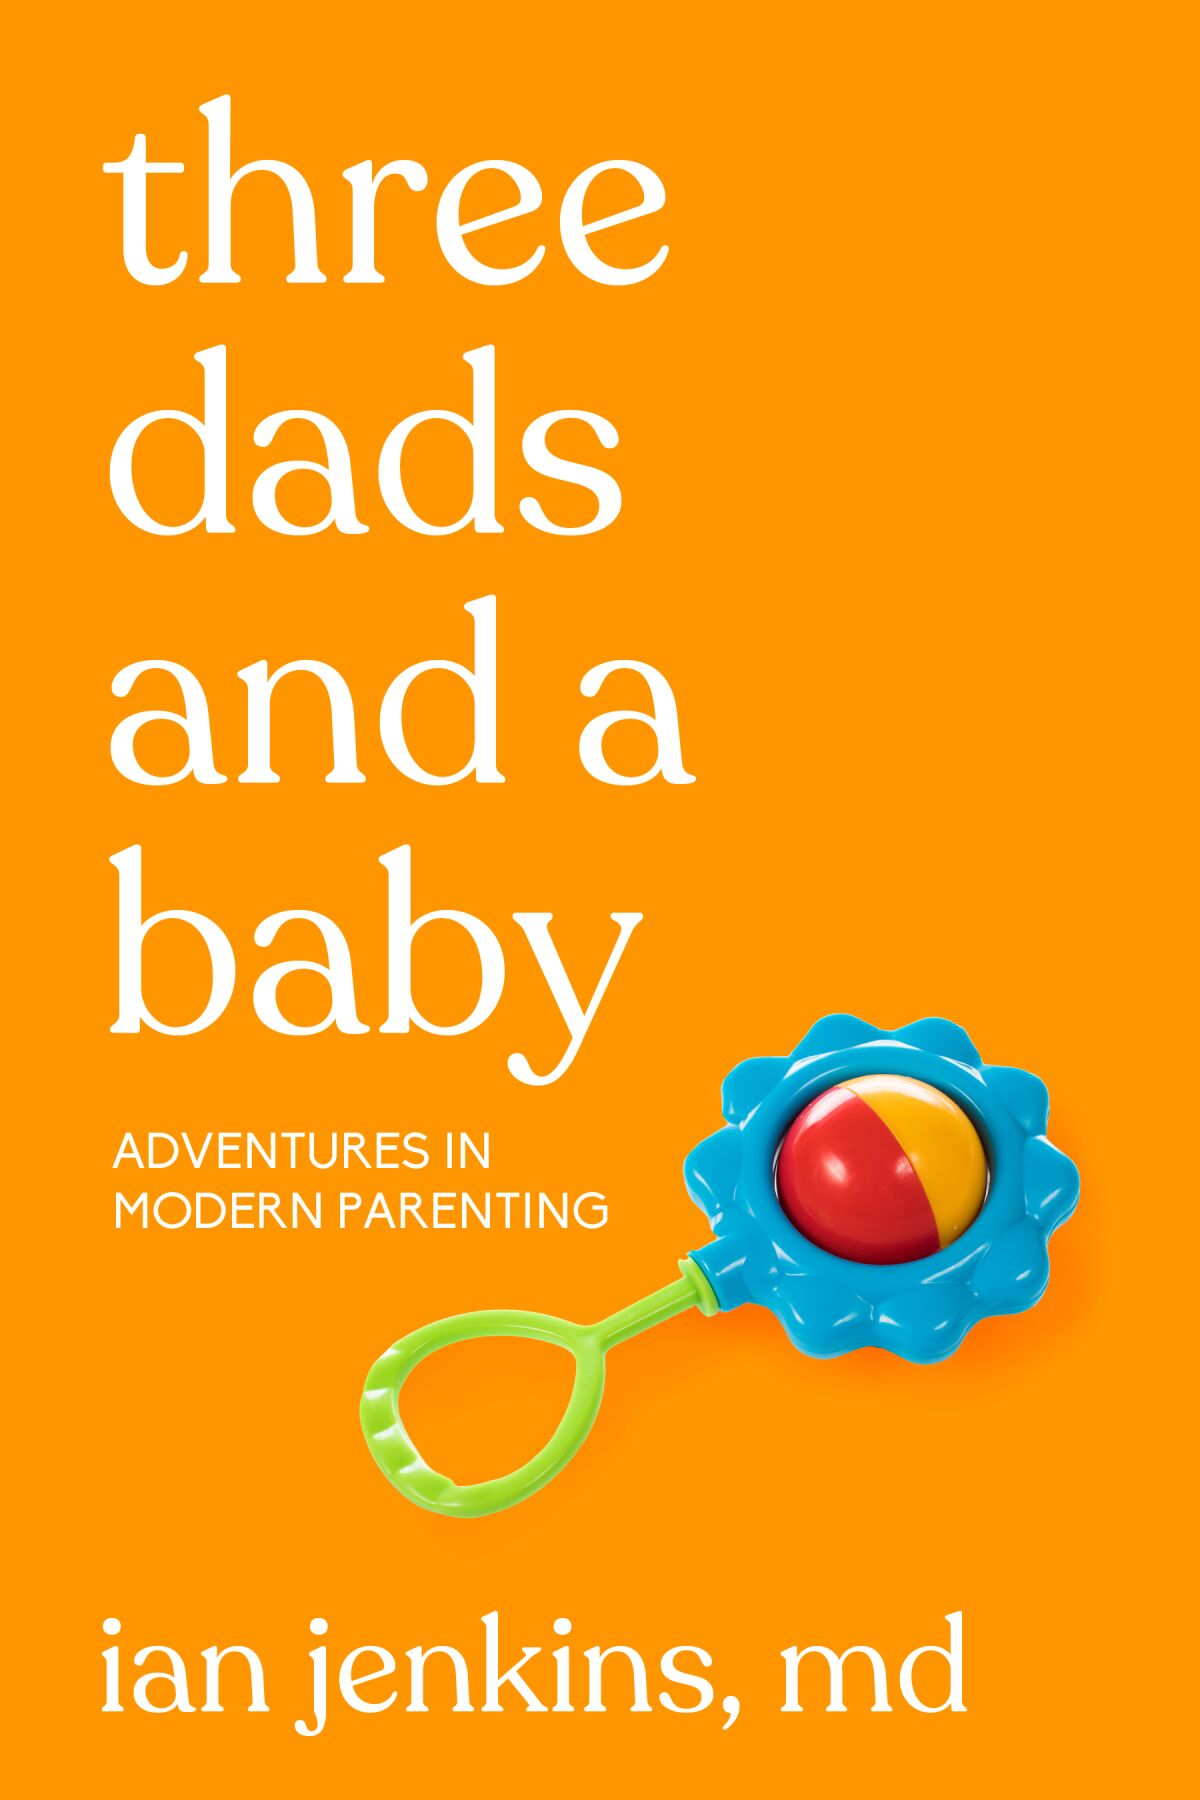 "Three Dads and a Baby: Adventures in Modern Parenting" book jacket.